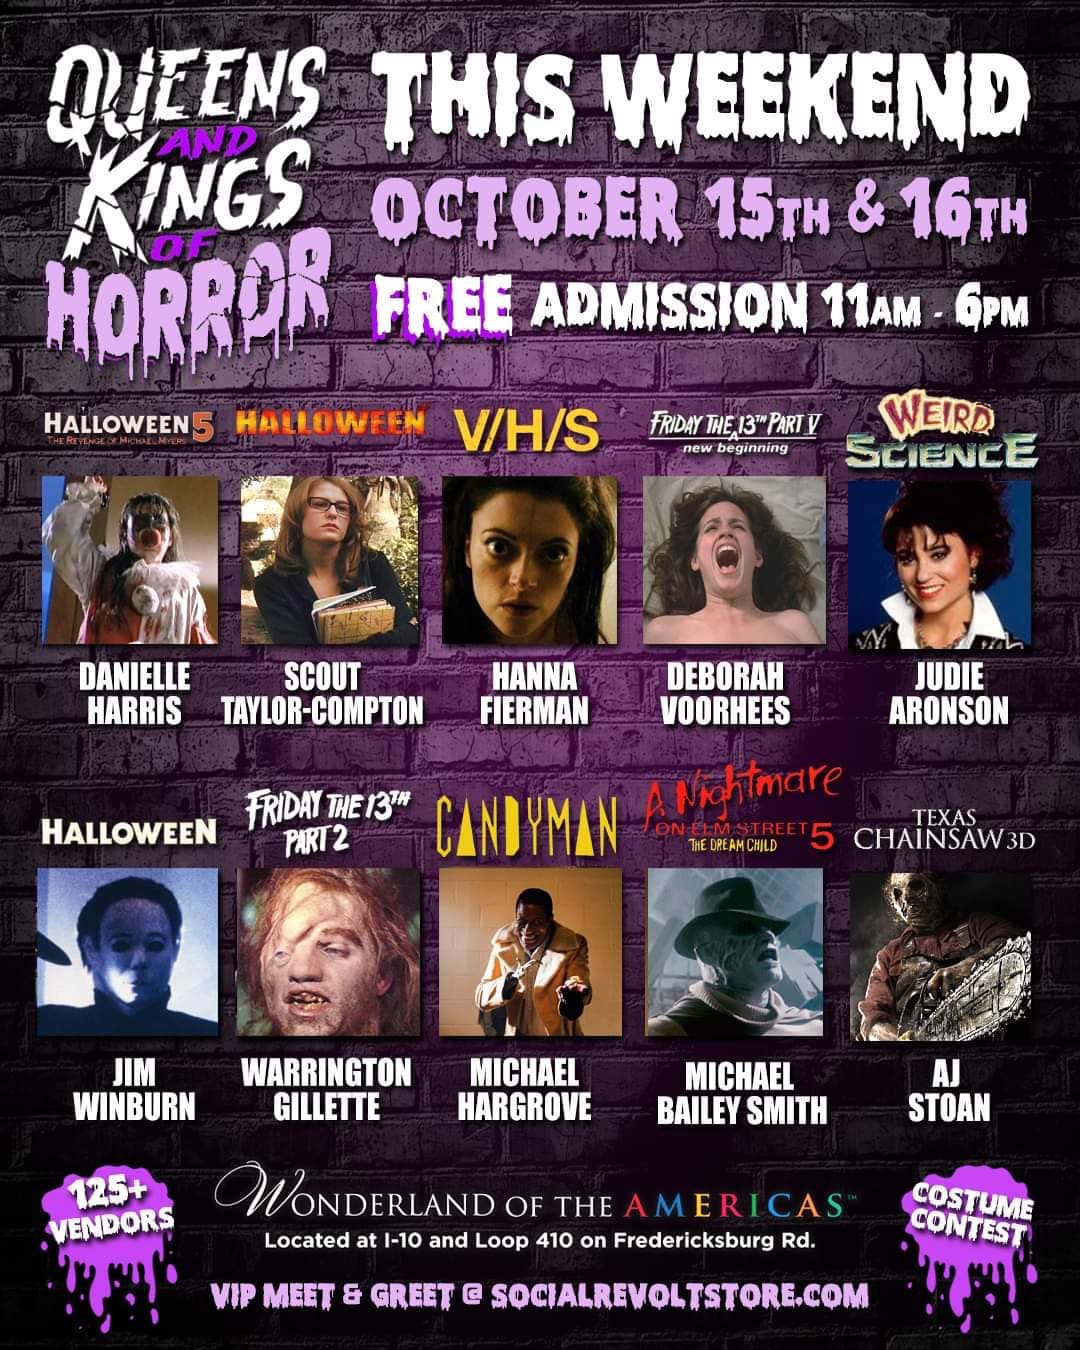 May be an image of 10 people and text that says 'QUEENS THIS WEEKEND KINGS AND OCTOBER 15TH & 16TH HORROR FREE ADMISSION 11AM 6pm HALLOWEEN HALLOWEEN V/H/S FRIDAY THE 13" new beginning WEIRD SCIENCE DANIELLE SCOUT HARRIS TAYLOR-COMPTON HANNA FIERMAN DEBORAH VOORHEES JUDIE ARONSON FRIDAY THE 131H CANDYMAN Nightmare TEXAS HALLOWEEN PART2 THEC 5 CHAINSAW 3D JIM WINBURN WARRINGTON GILLETTE MICHAEL HARGROVE 125+ VENDORS MICHAEL BAILEY SMITH AJ STOAN WONDERLAND OF THE AMERICAS CAS Located at -10 and Loop 410 on Fredericksburg Rd. VIP MEET & GREET @ SOCIALREVOLTSTORE.COM COSTUME CONTEST'